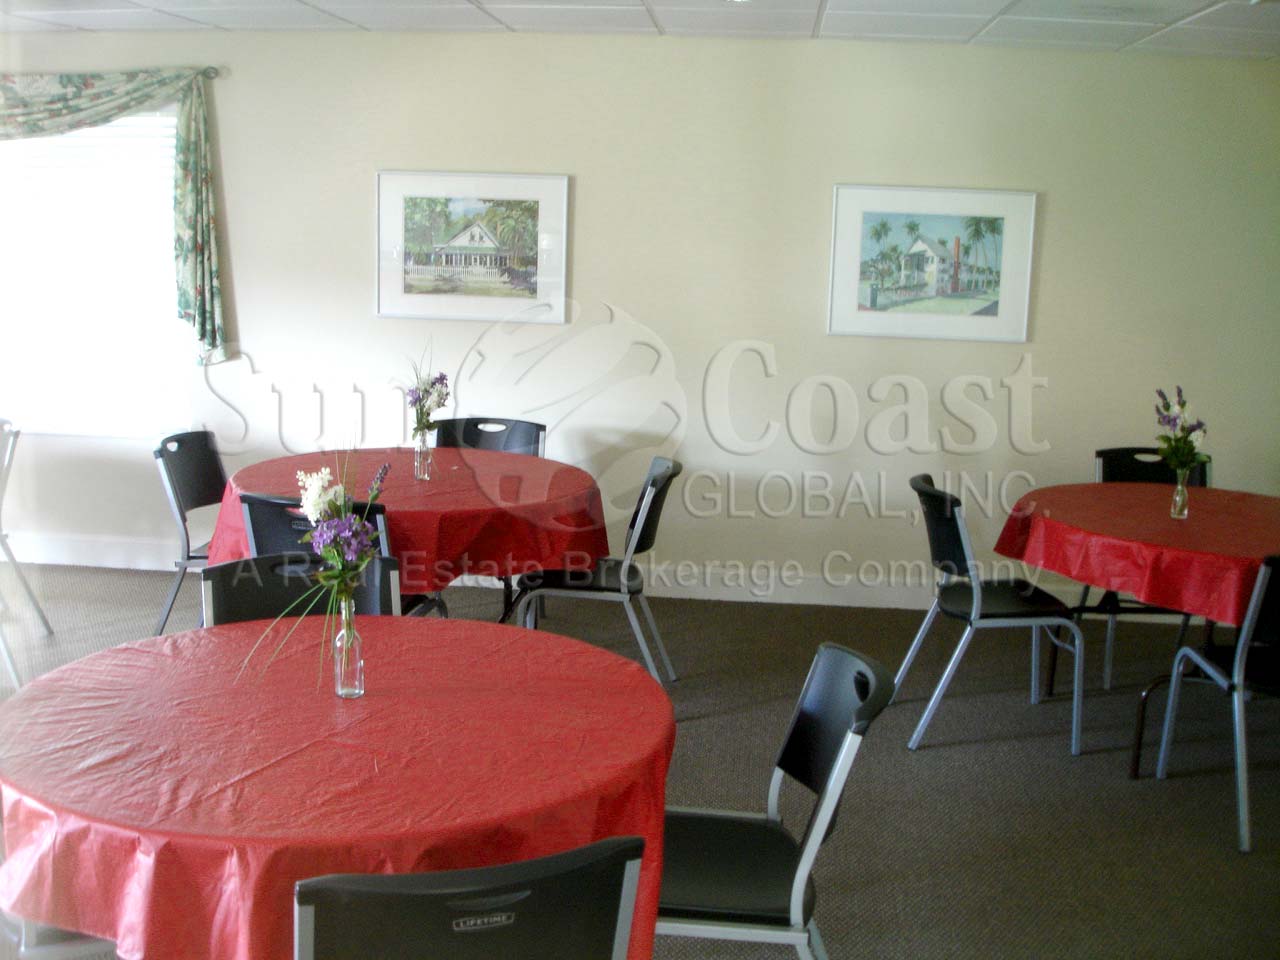 VILLAGE GREEN Clubhouse Community Room